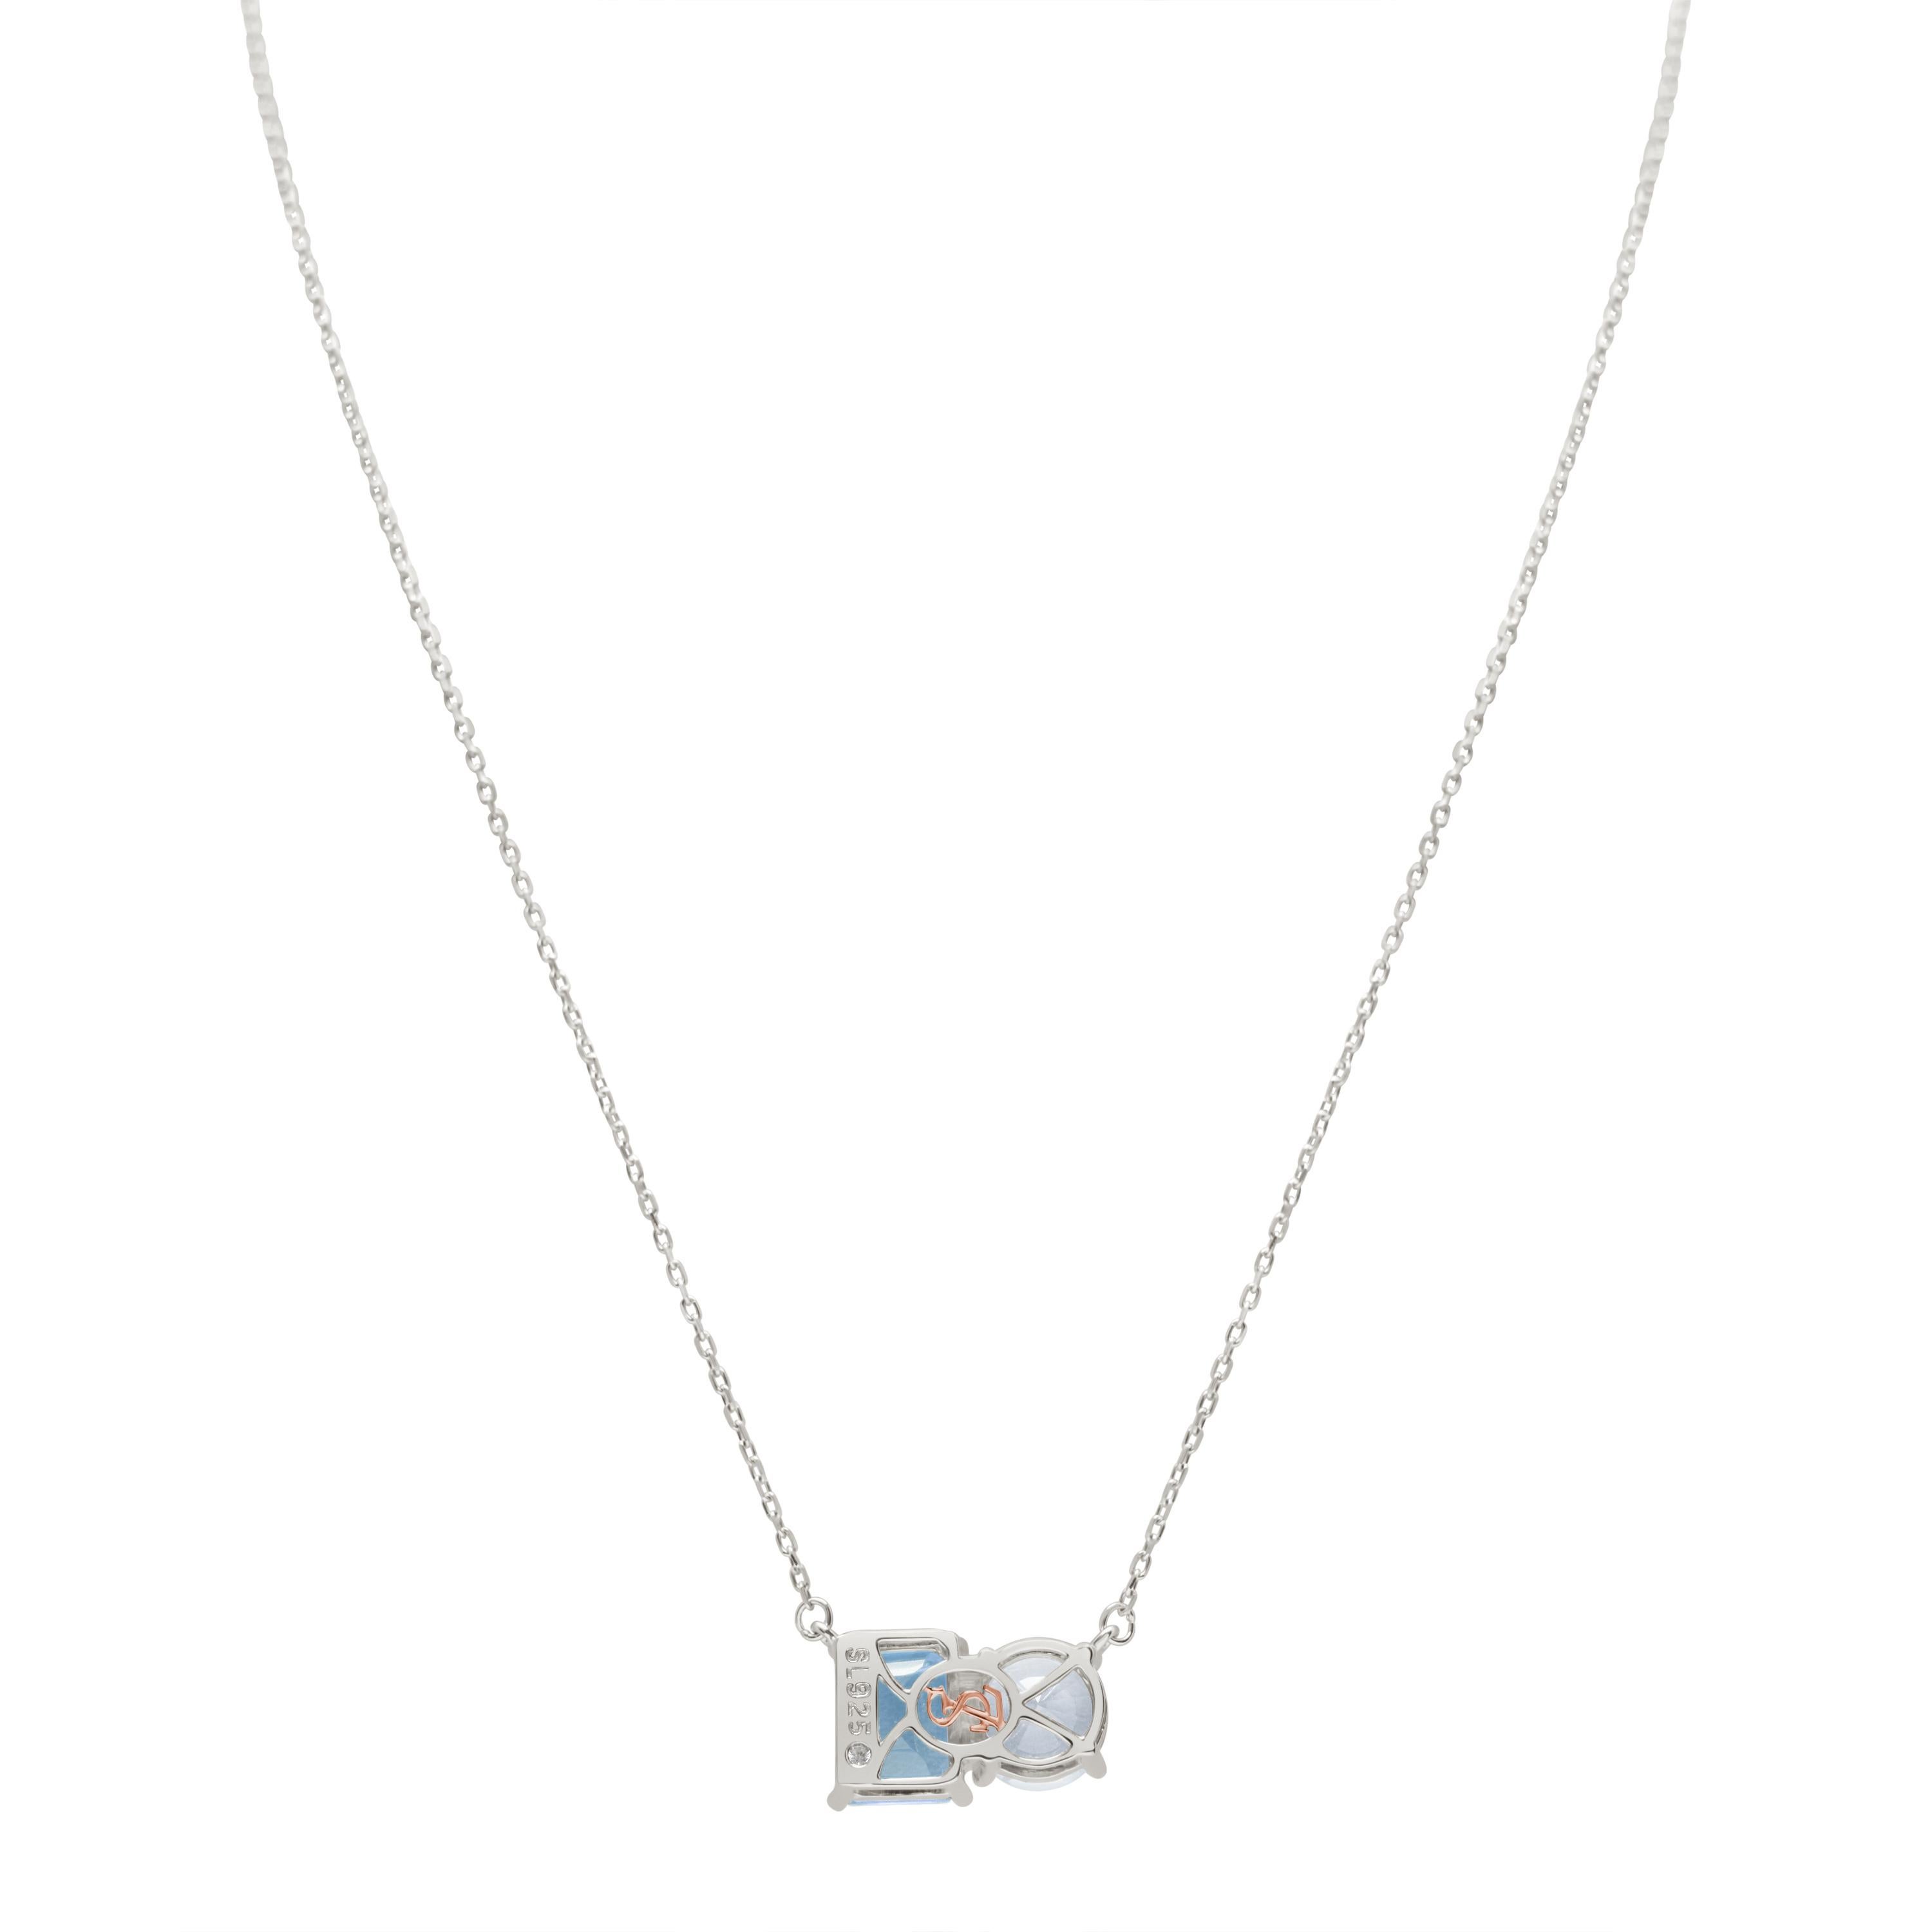 Shimmering in hues of white and blue, this Suzy Levian necklace is as on trend as can be, and features a round cut white topaz and an emerald cut blue topaz as a perfectly matched pair. This necklace symbolizes a perfect pairing of unique shapes.